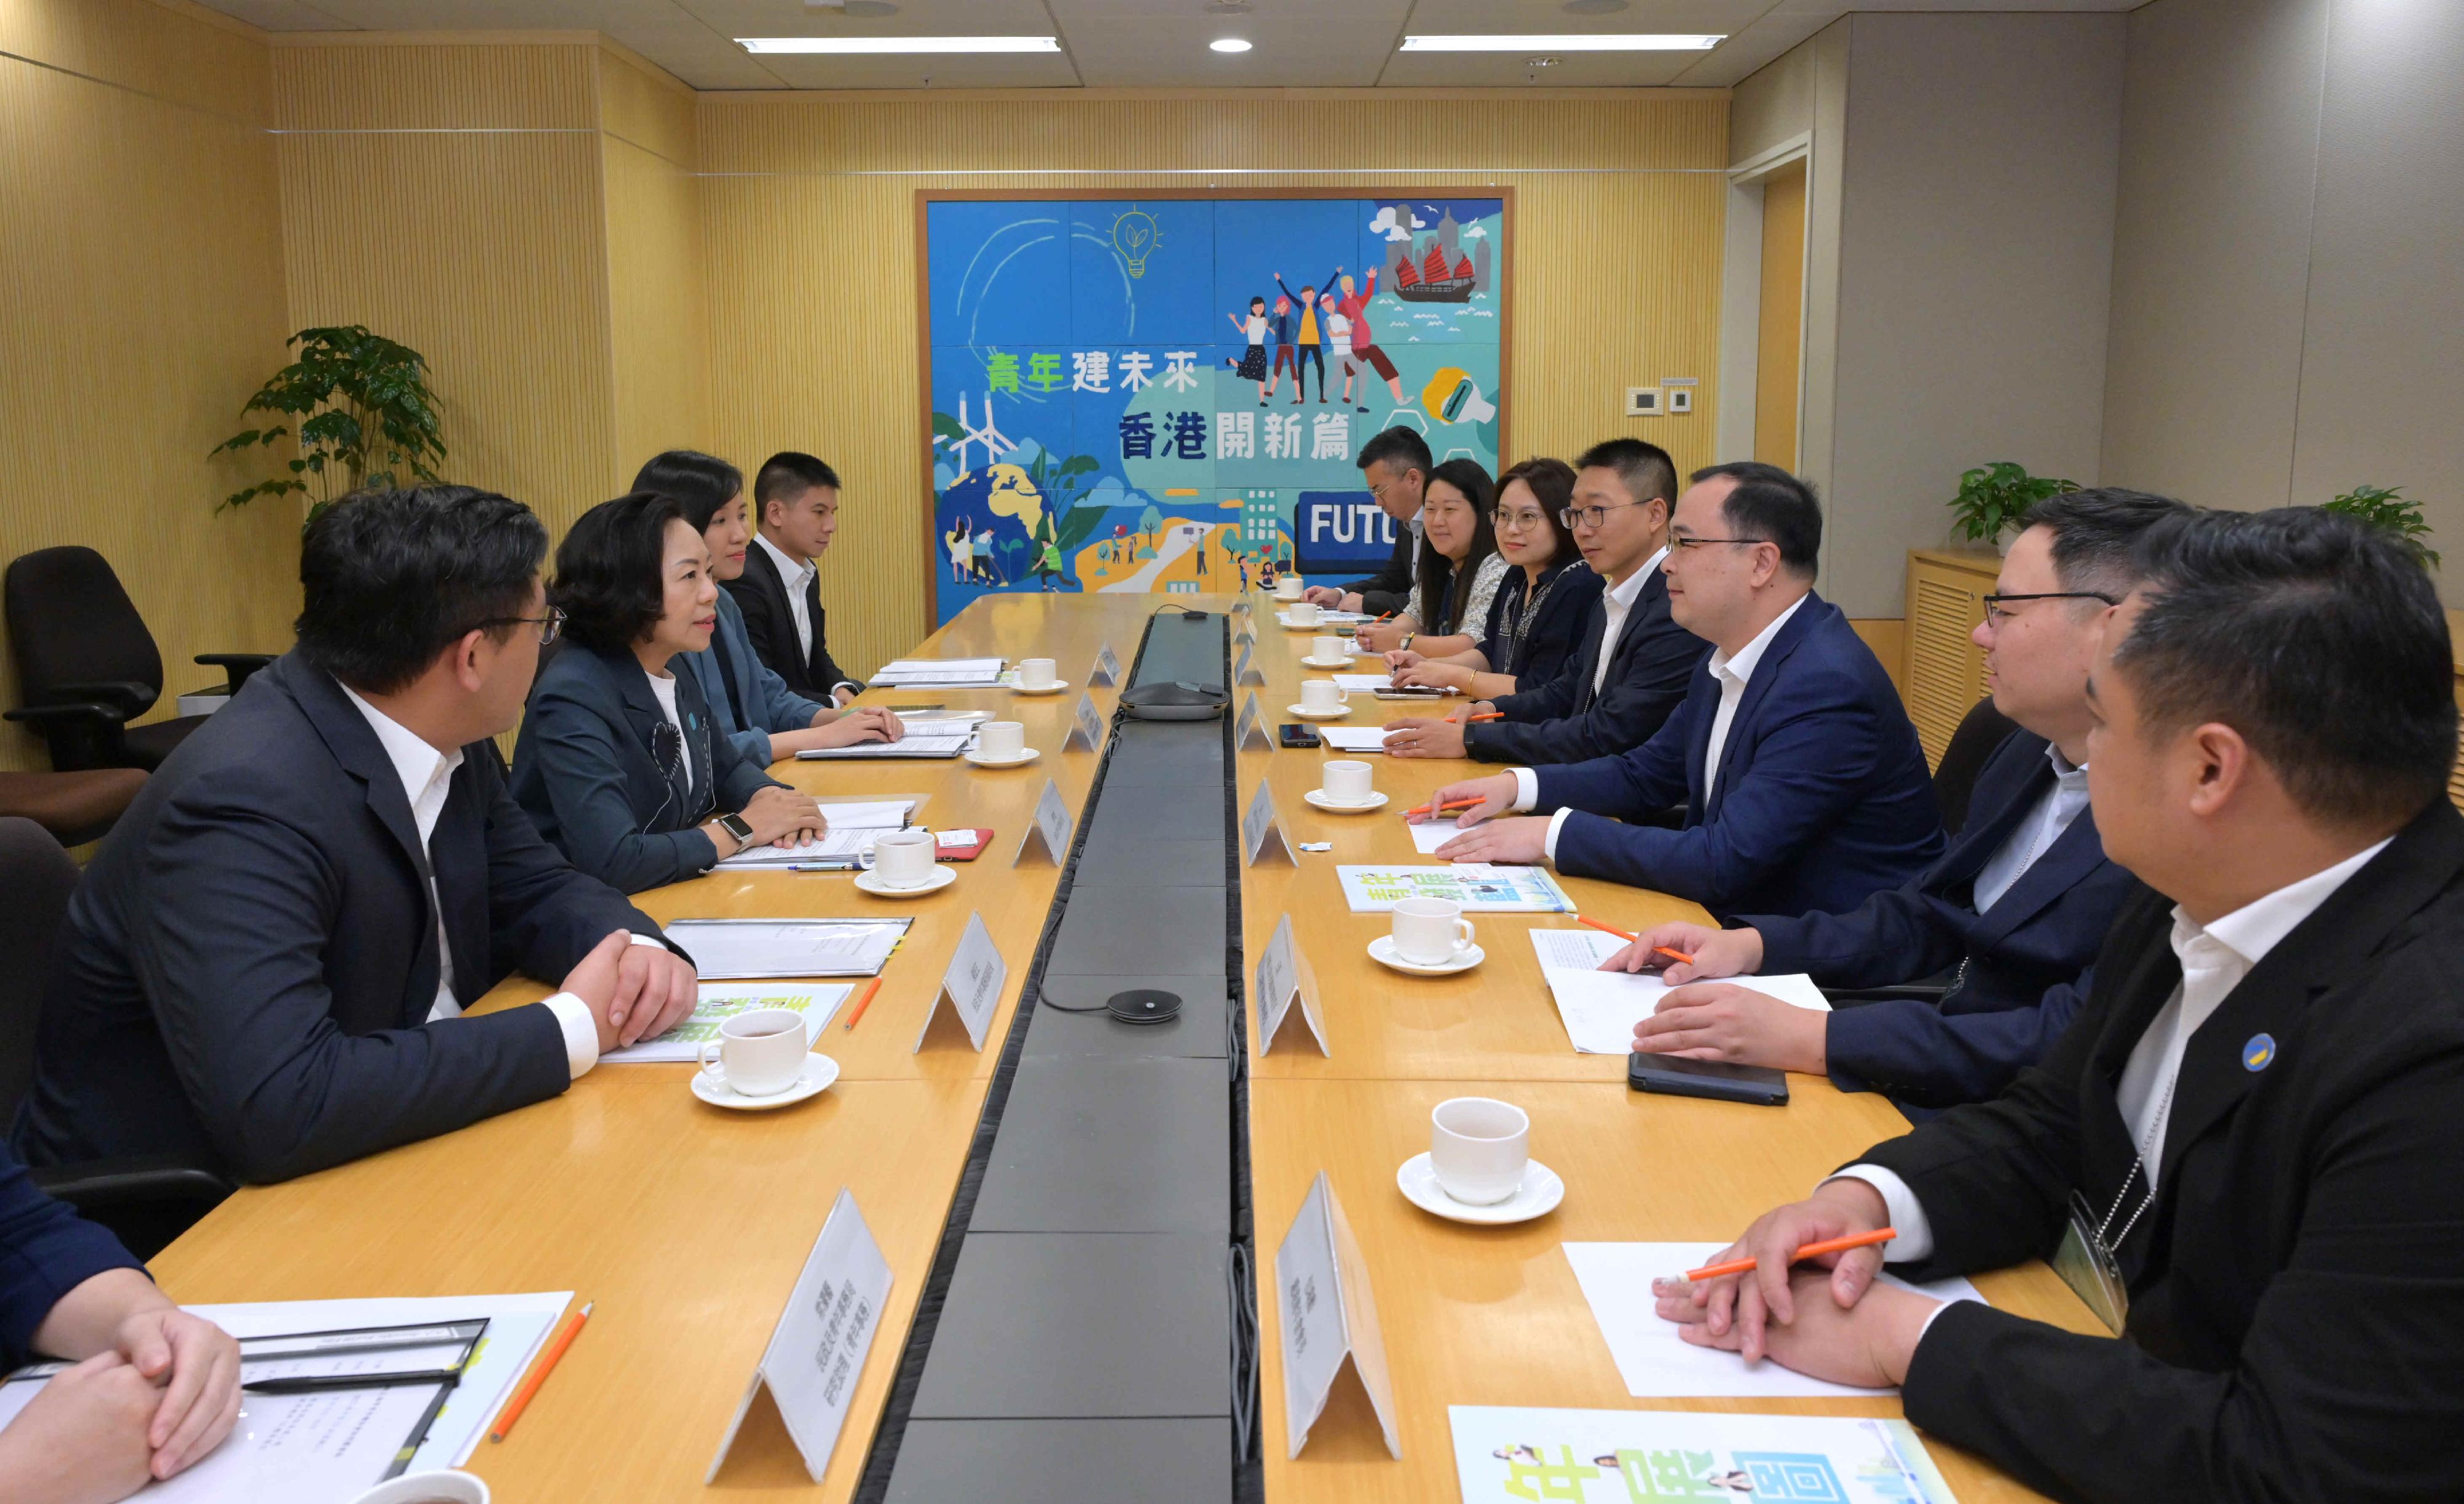 The Secretary for Home and Youth Affairs, Miss Alice Mak, today (September 13) met with Deputy Secretary of the Shanghai Committee of the Communist Youth League of China and the President of the Shanghai Youth Federation Mr Wu Bin. Photo shows Miss Mak (second left), and the Under Secretary for Home and Youth Affairs, Mr Clarence Leung (first left), meeting with Mr Wu (third right) and members of the delegation to discuss items of mutual interest.